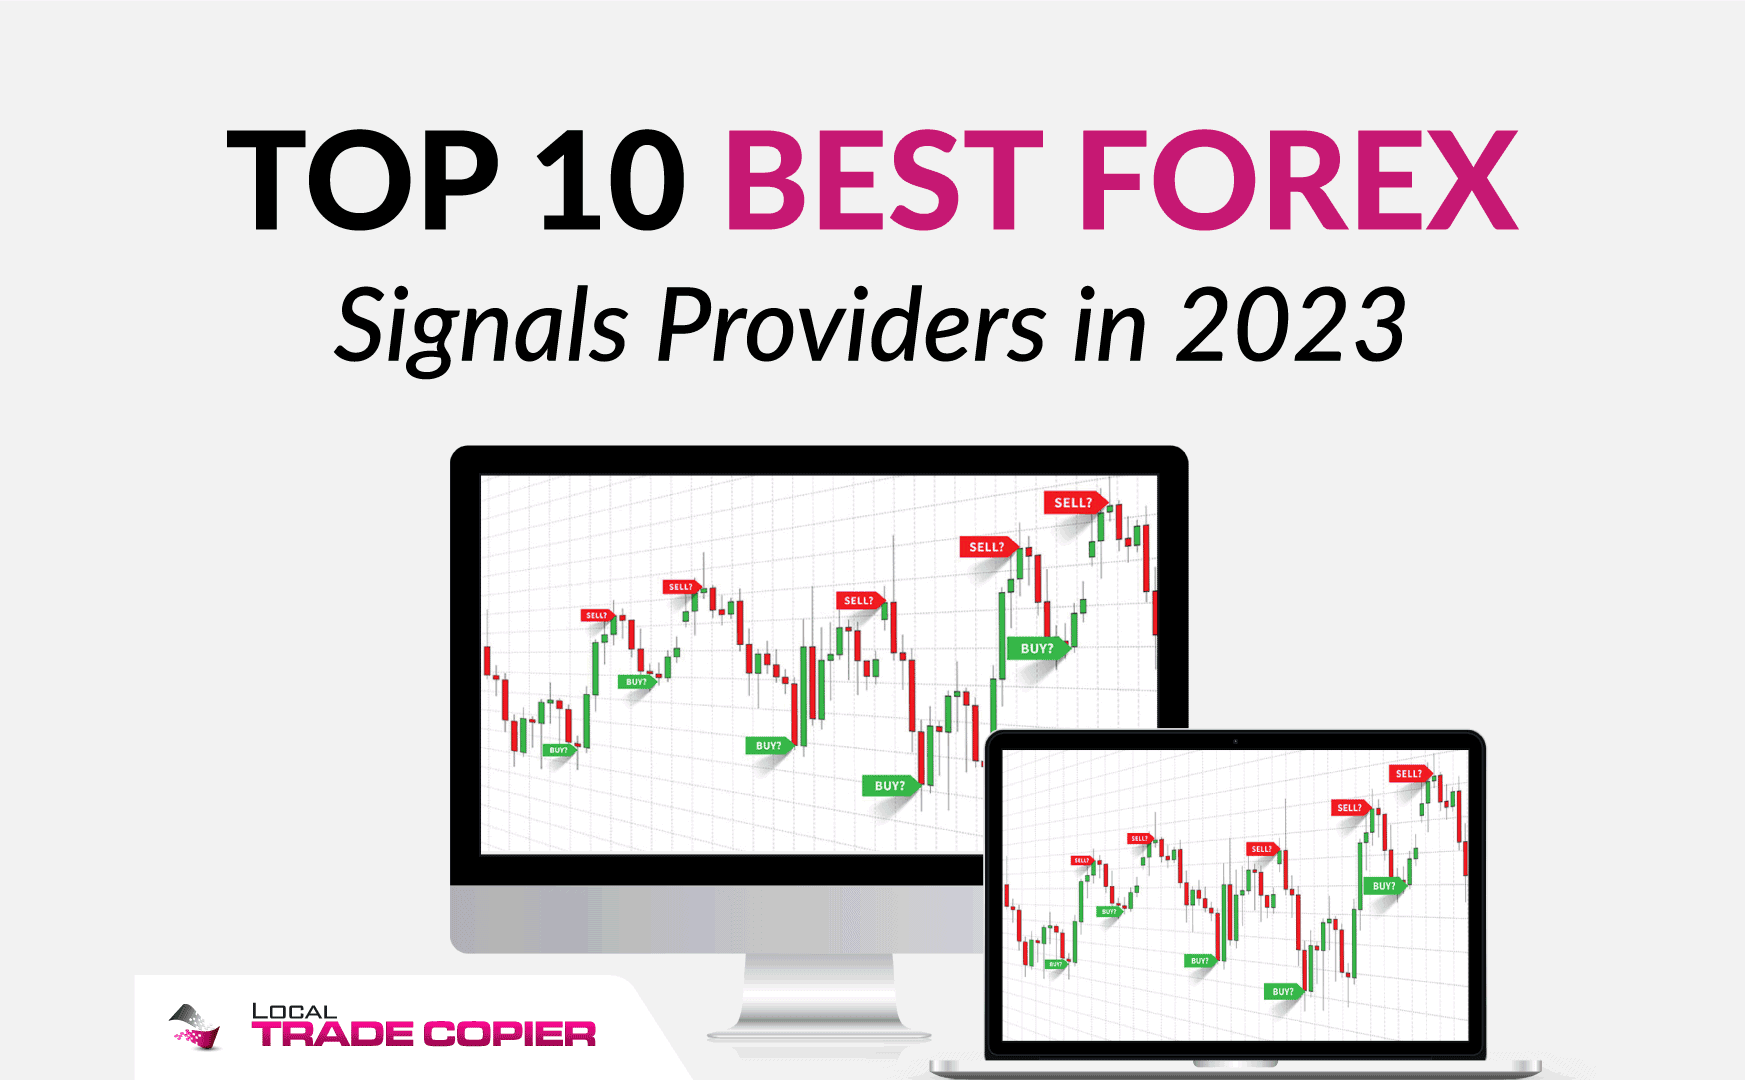 Top 10 Best Forex Signals Providers in 2023